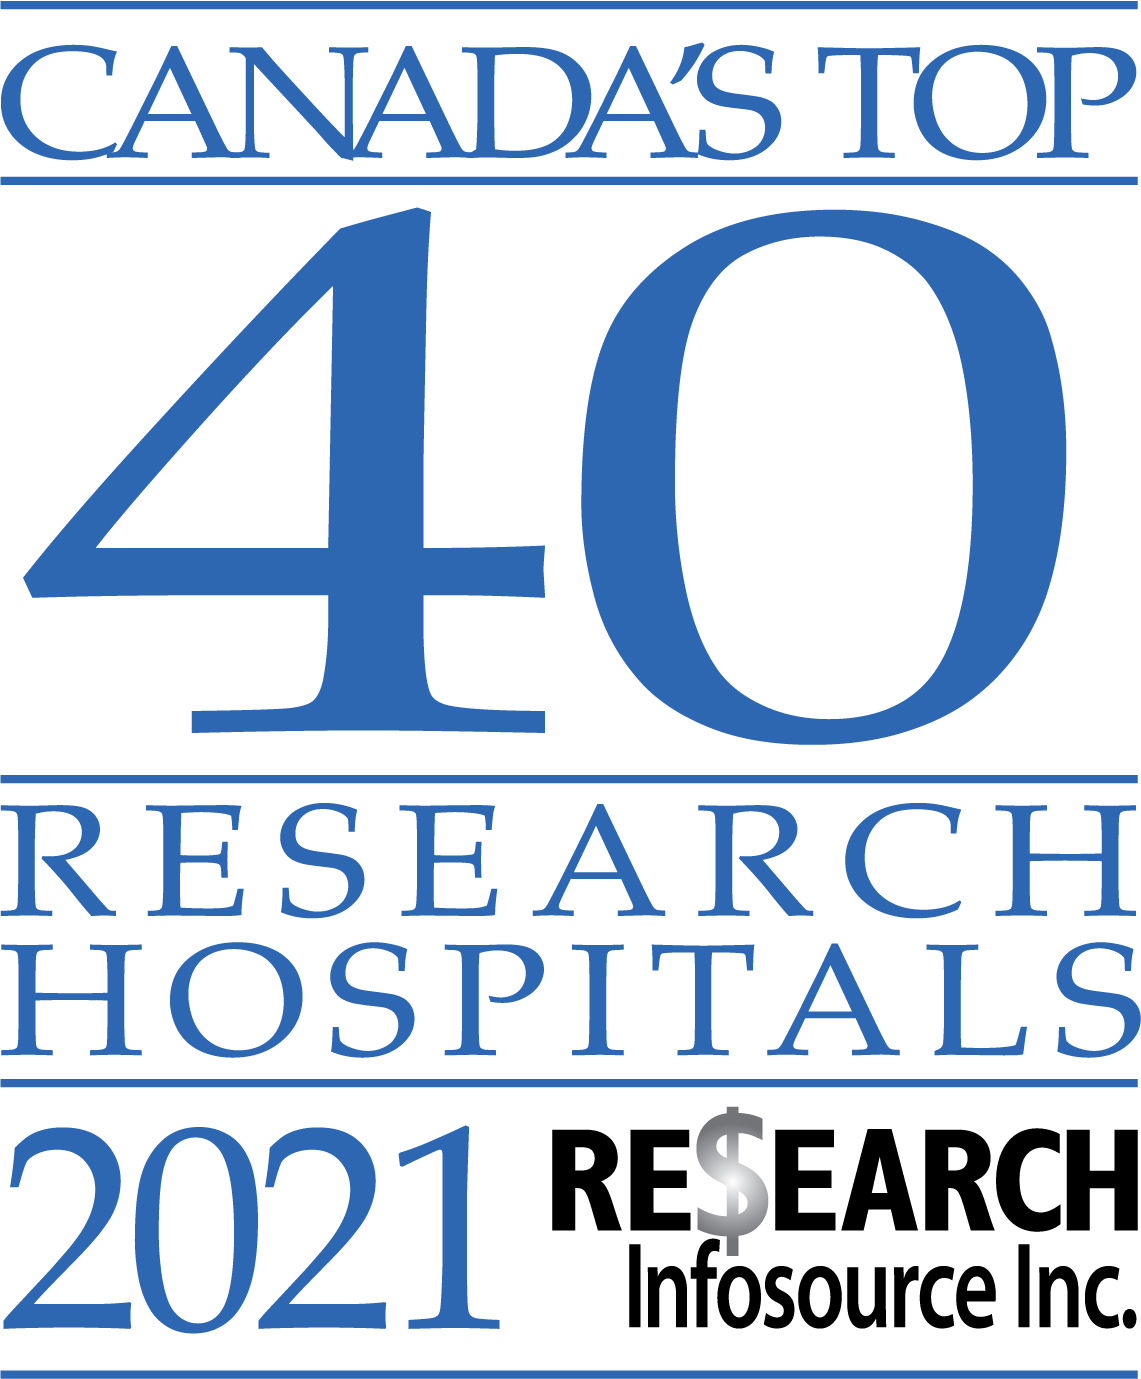 Canada's Top 40 Research Hospital's logo